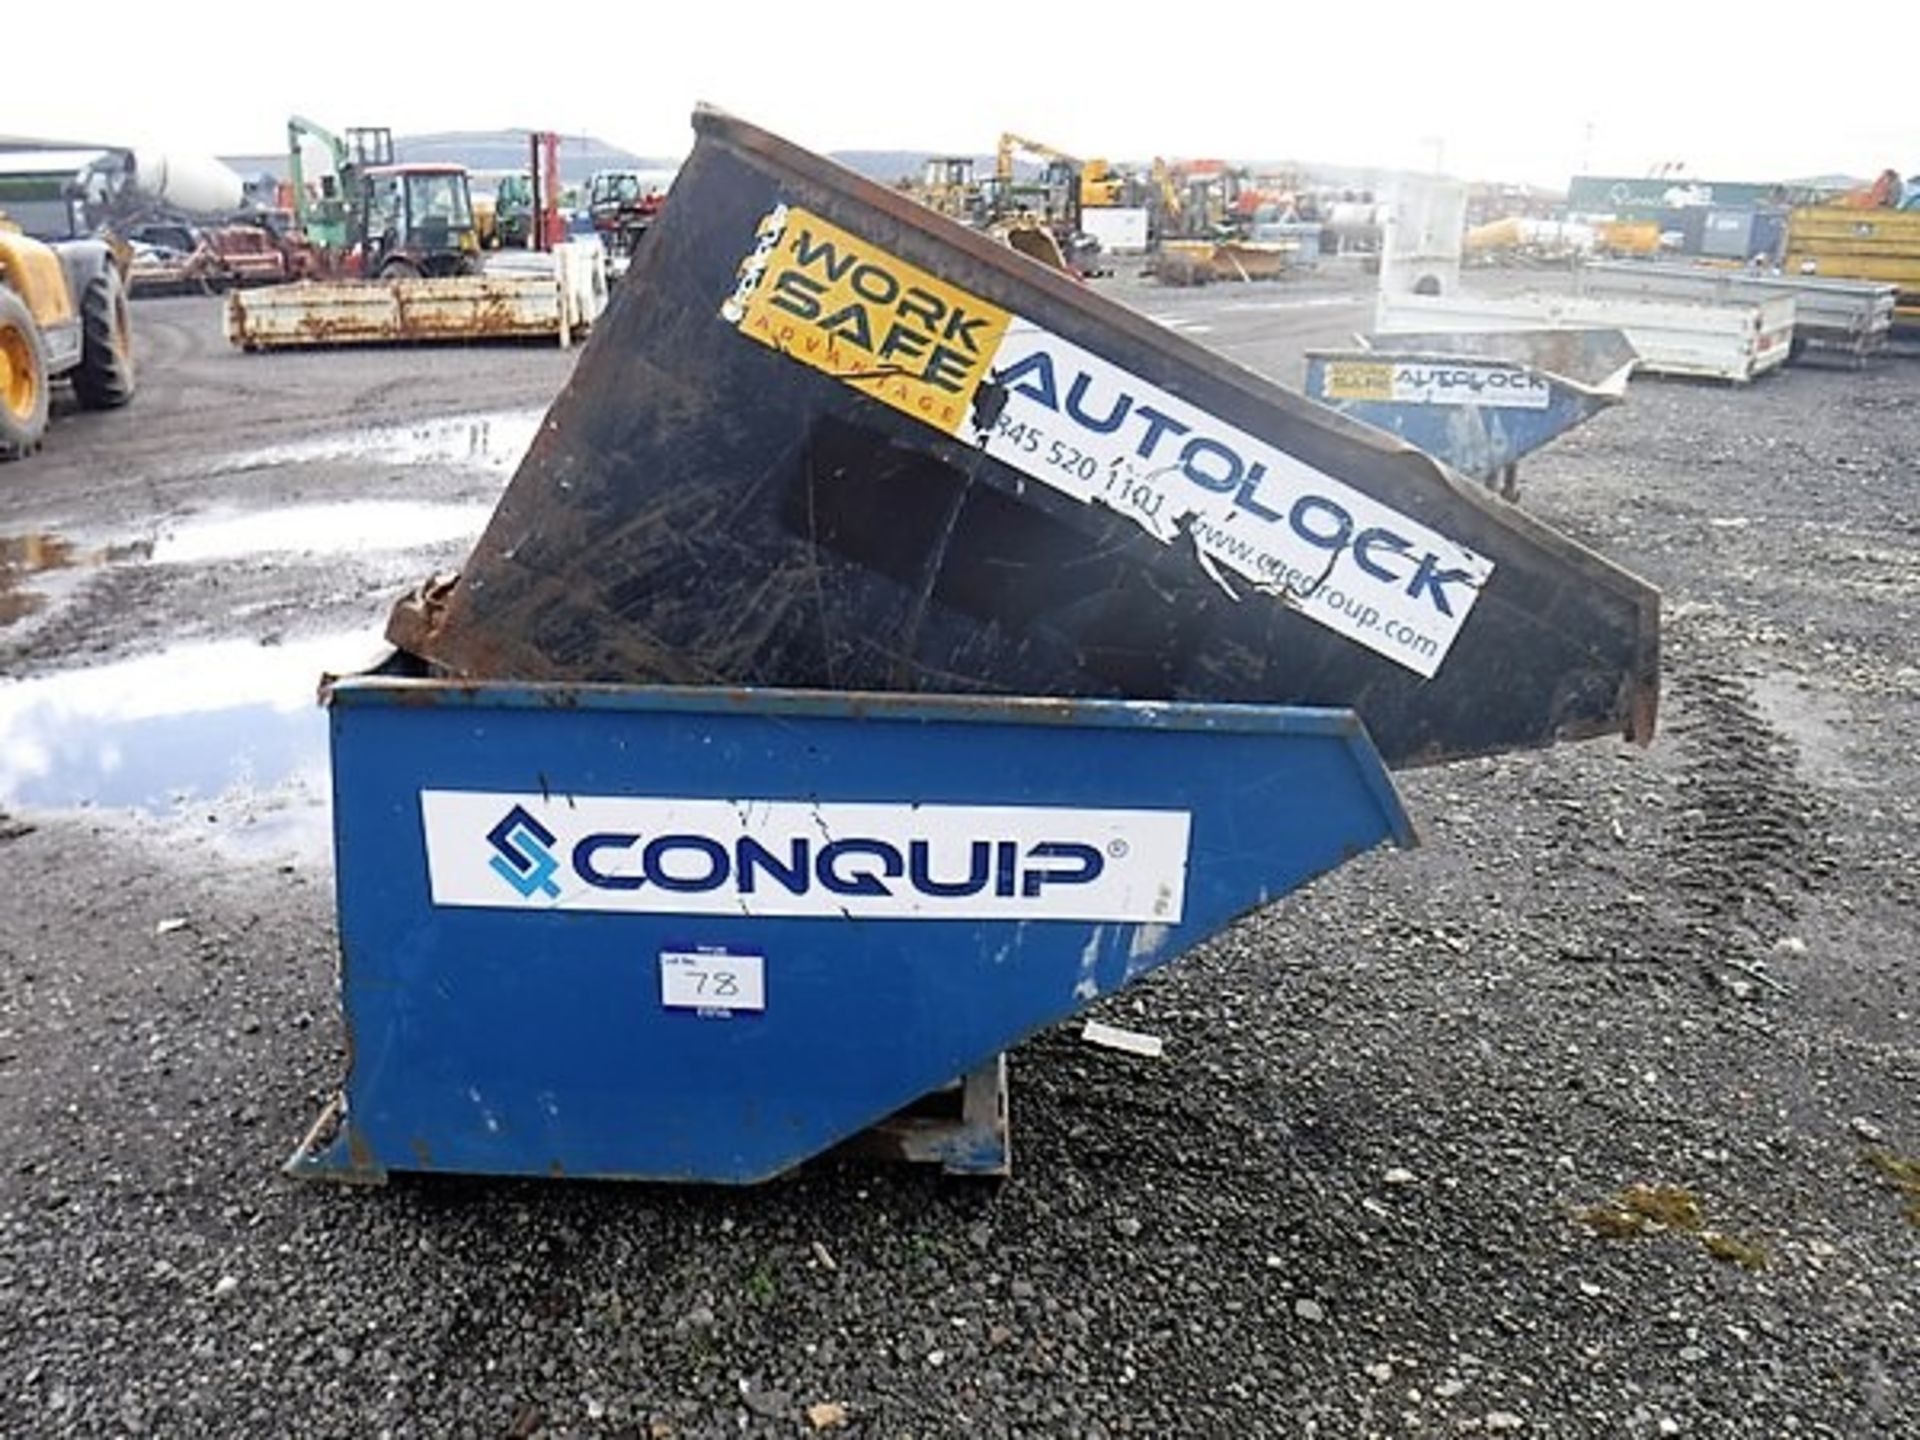 2016 & 2017 CONQUIP 1200ltr tipping skips S/N CQ62860 & CQ57230. Asset Nos 7770 & 6693 - Image 3 of 6